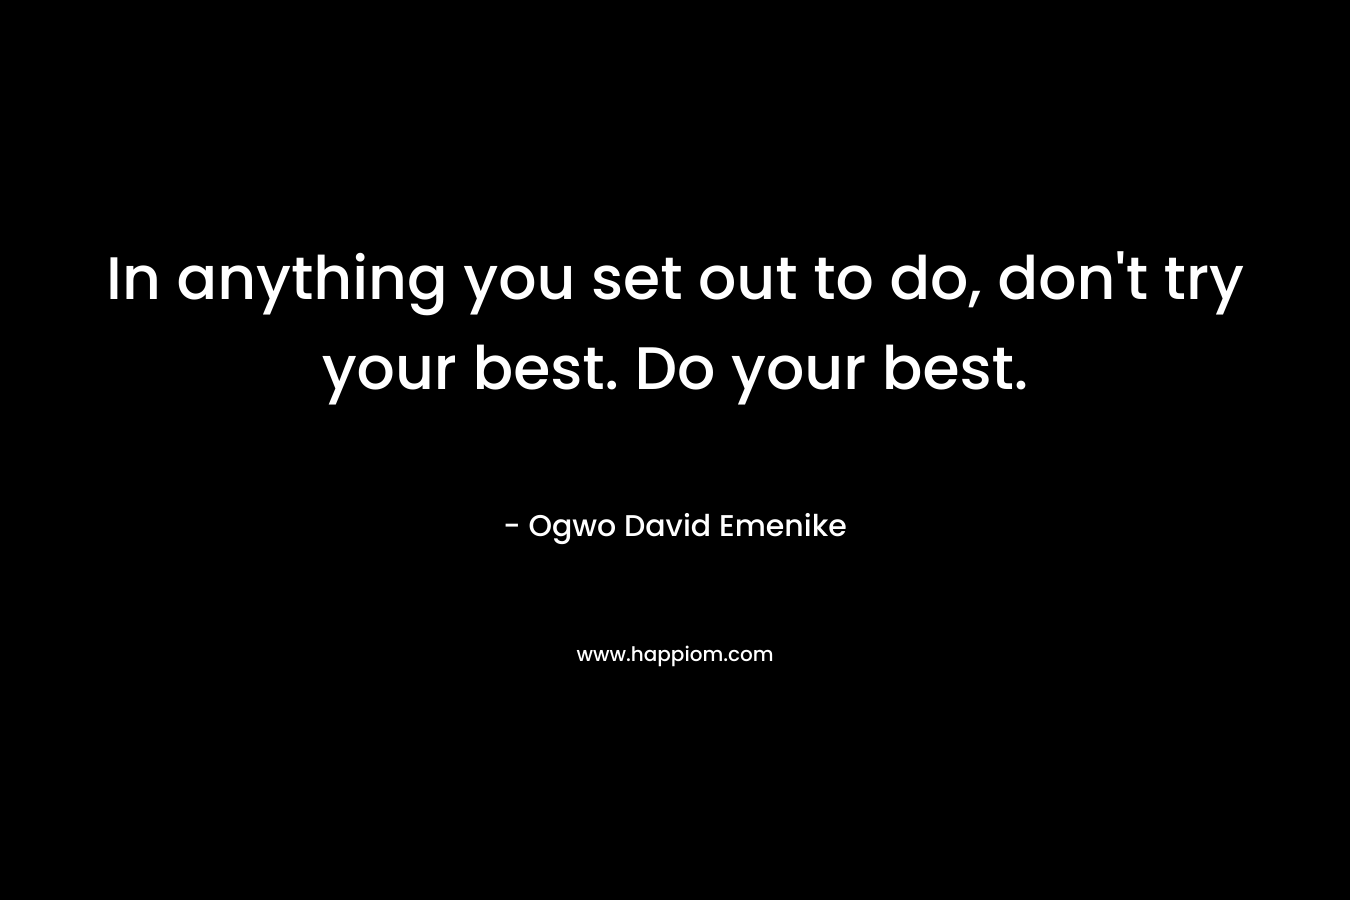 In anything you set out to do, don’t try your best. Do your best. – Ogwo David Emenike